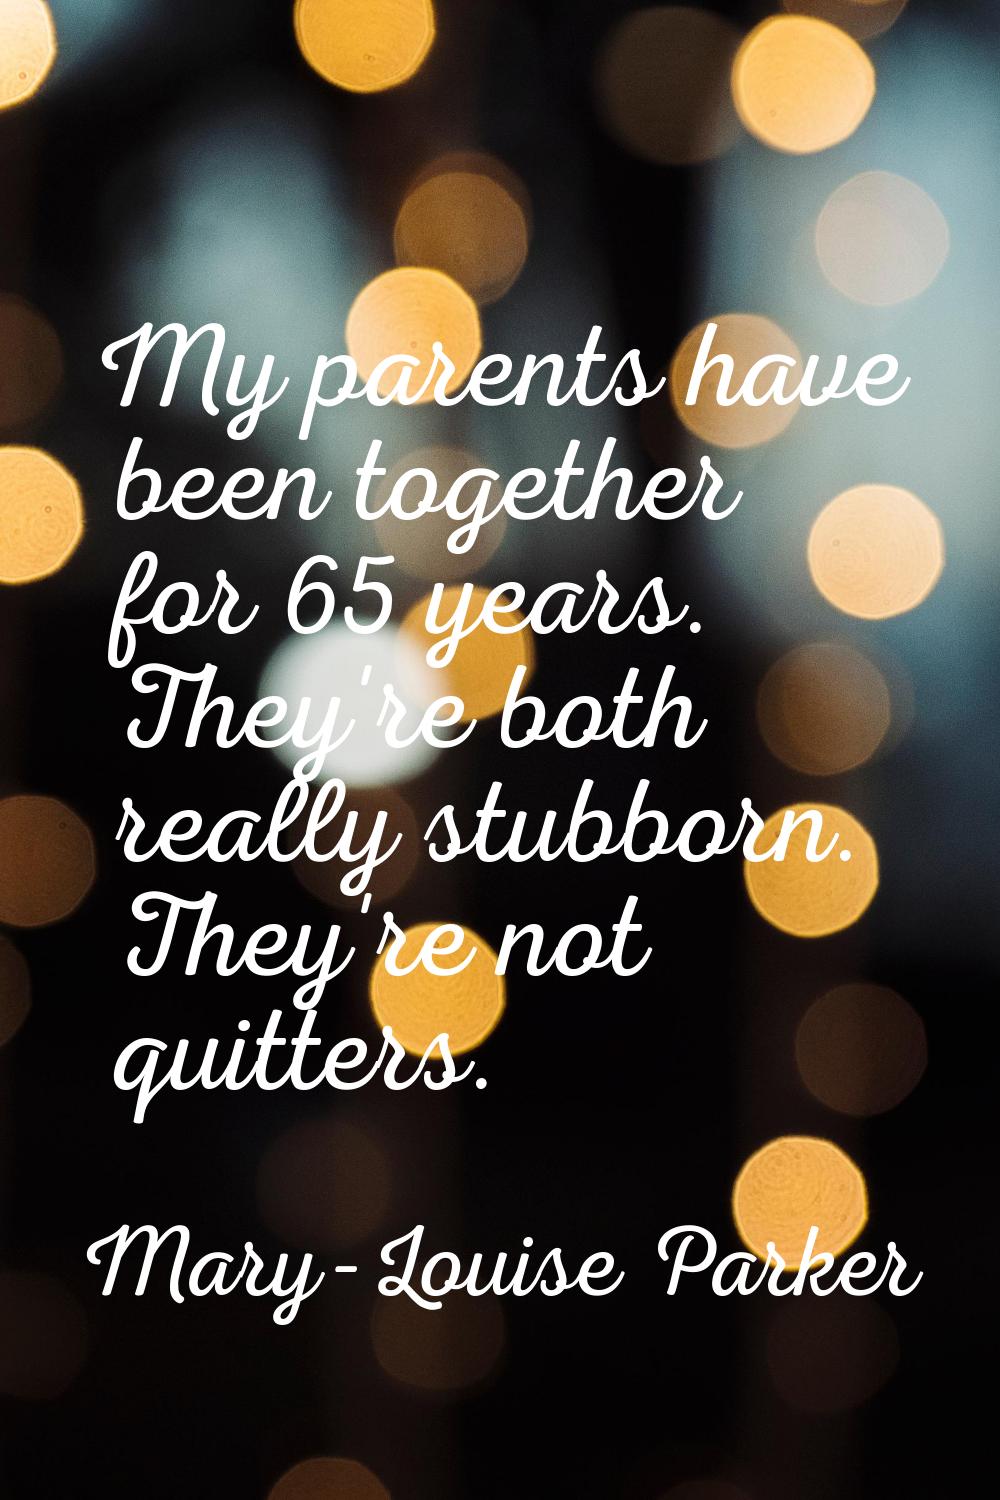 My parents have been together for 65 years. They're both really stubborn. They're not quitters.